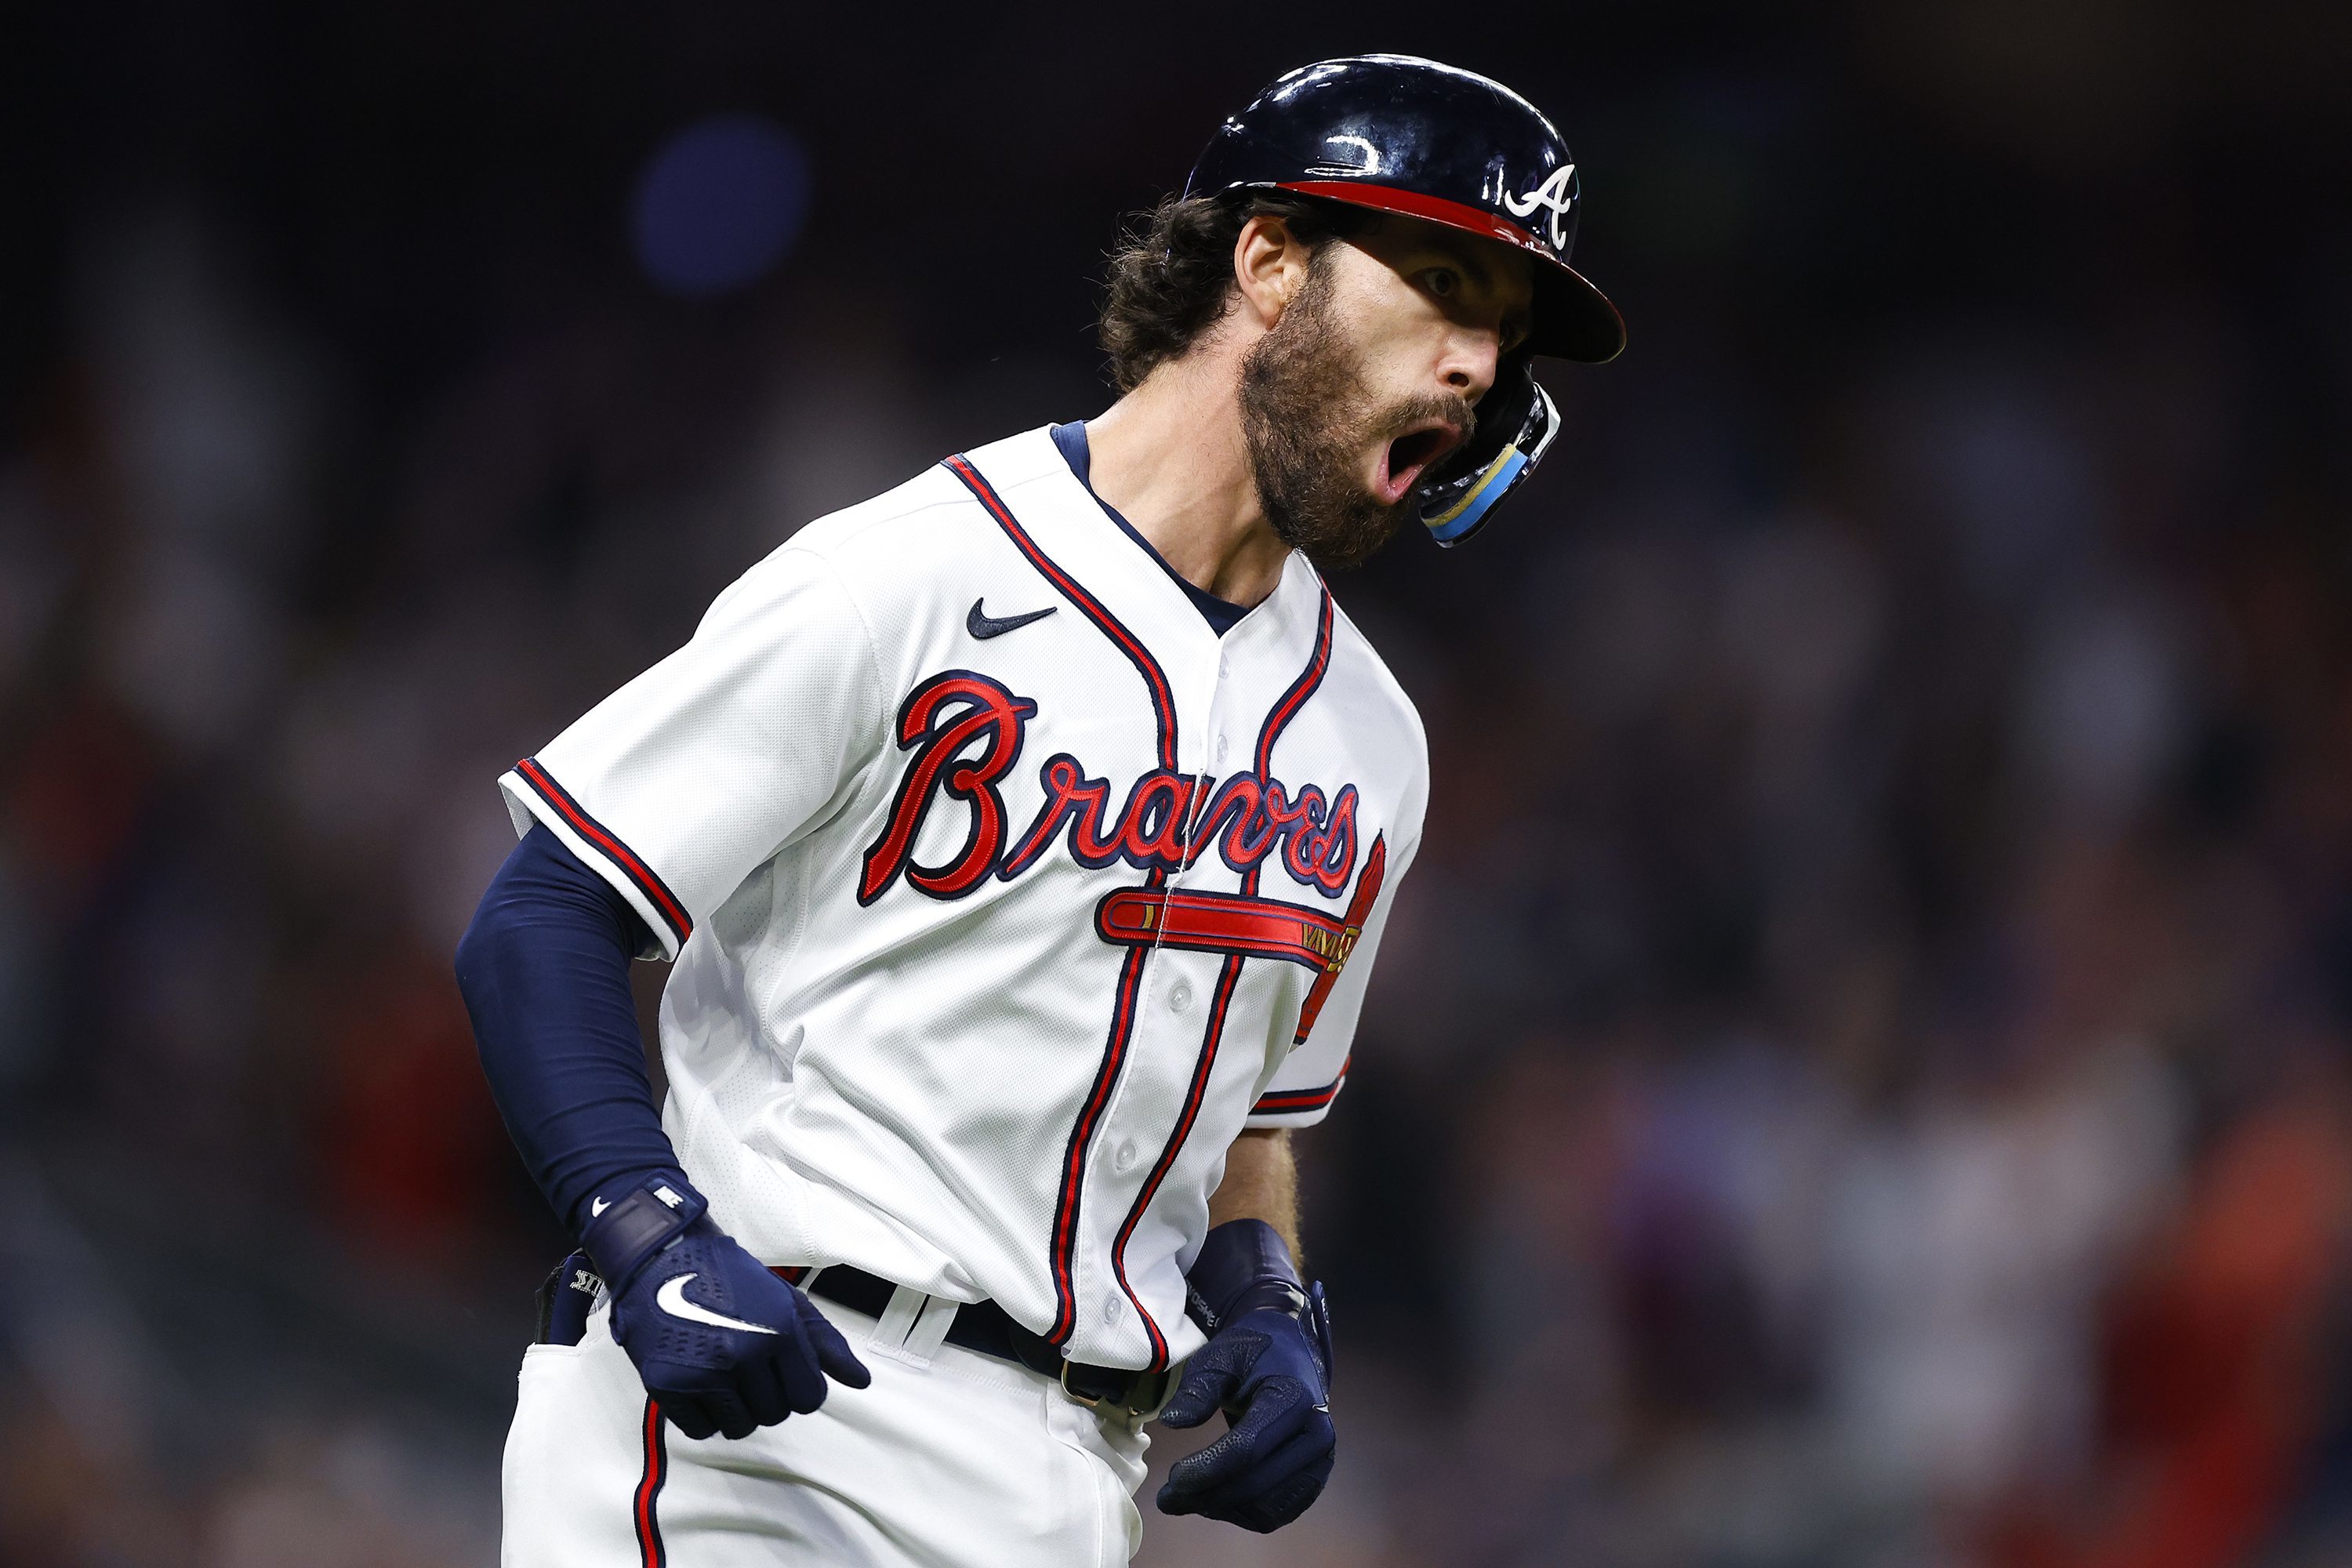 Atlanta Braves Shortstop Dansby Swanson looks on during the game